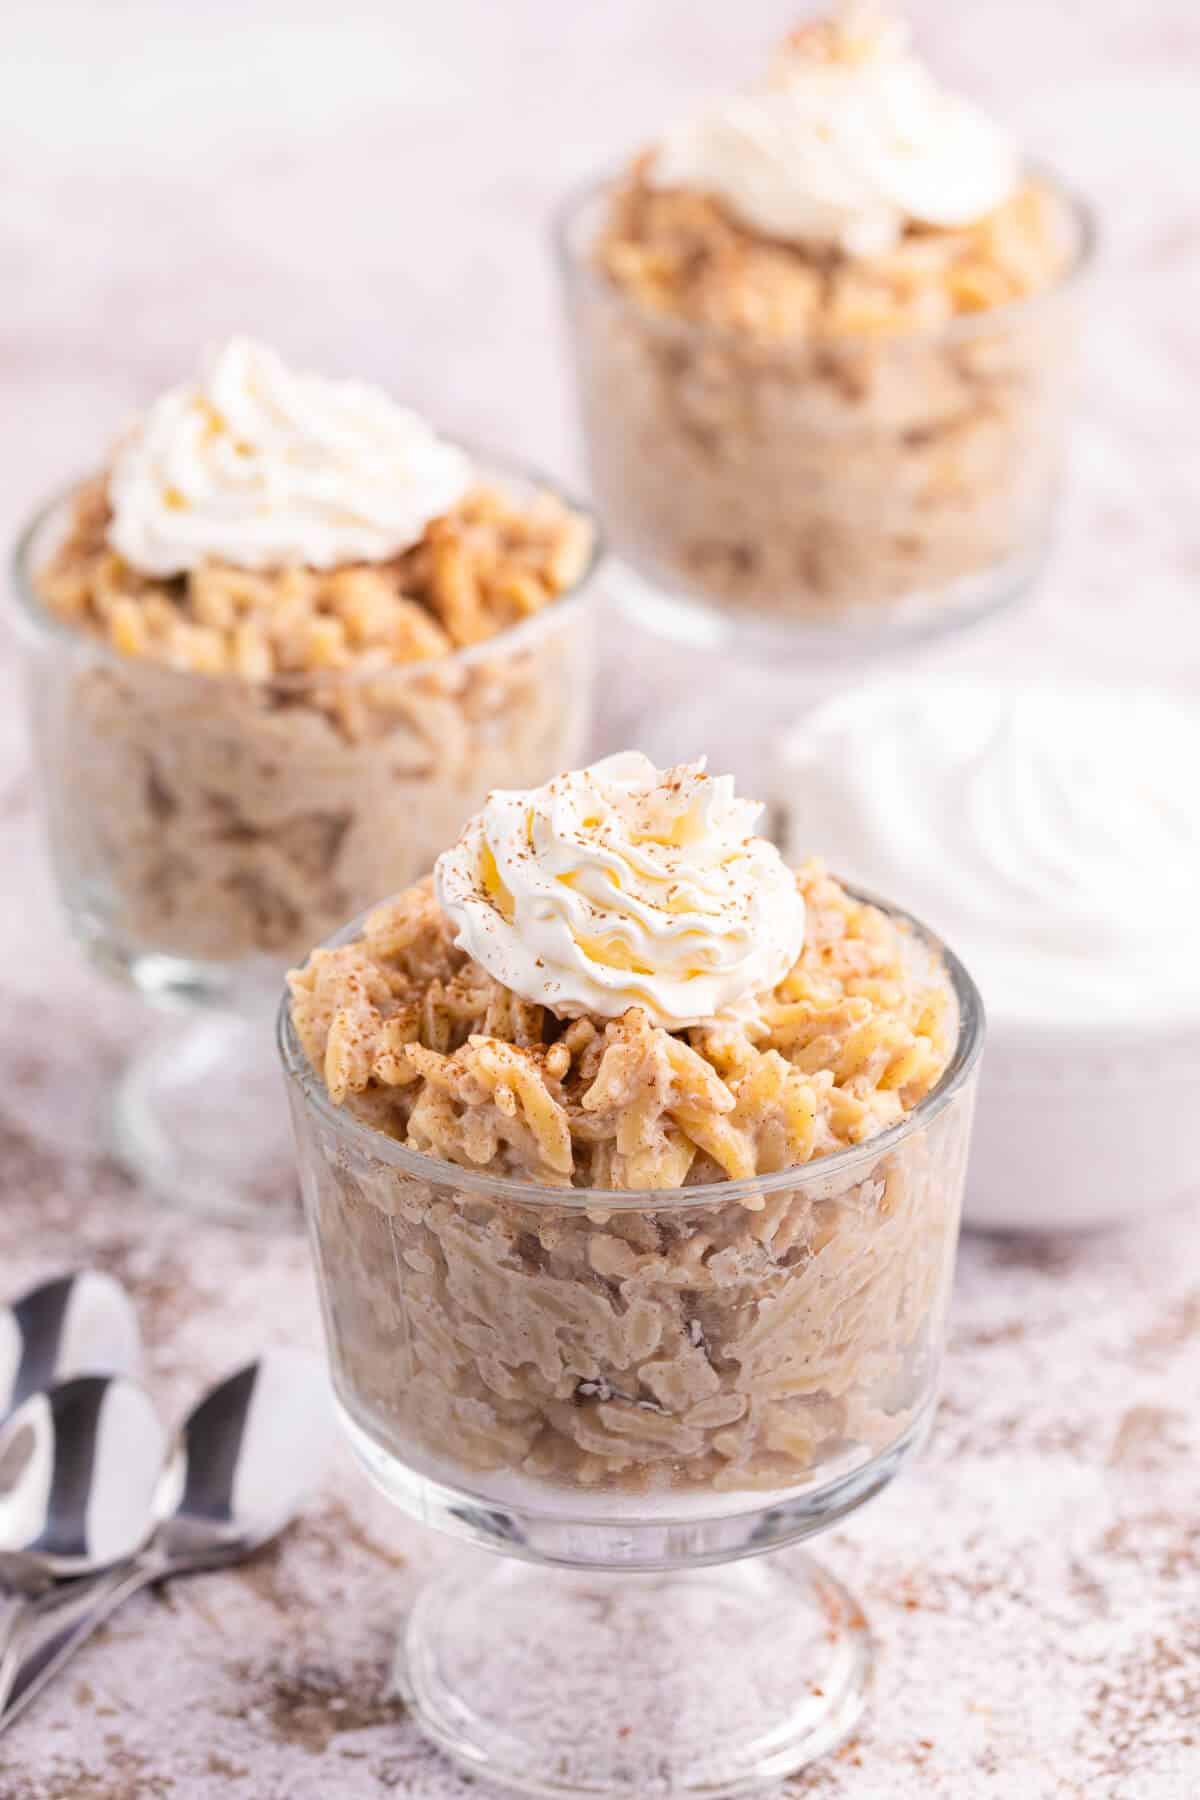 Orzo pudding topped with whipped cream in a parfait dish.